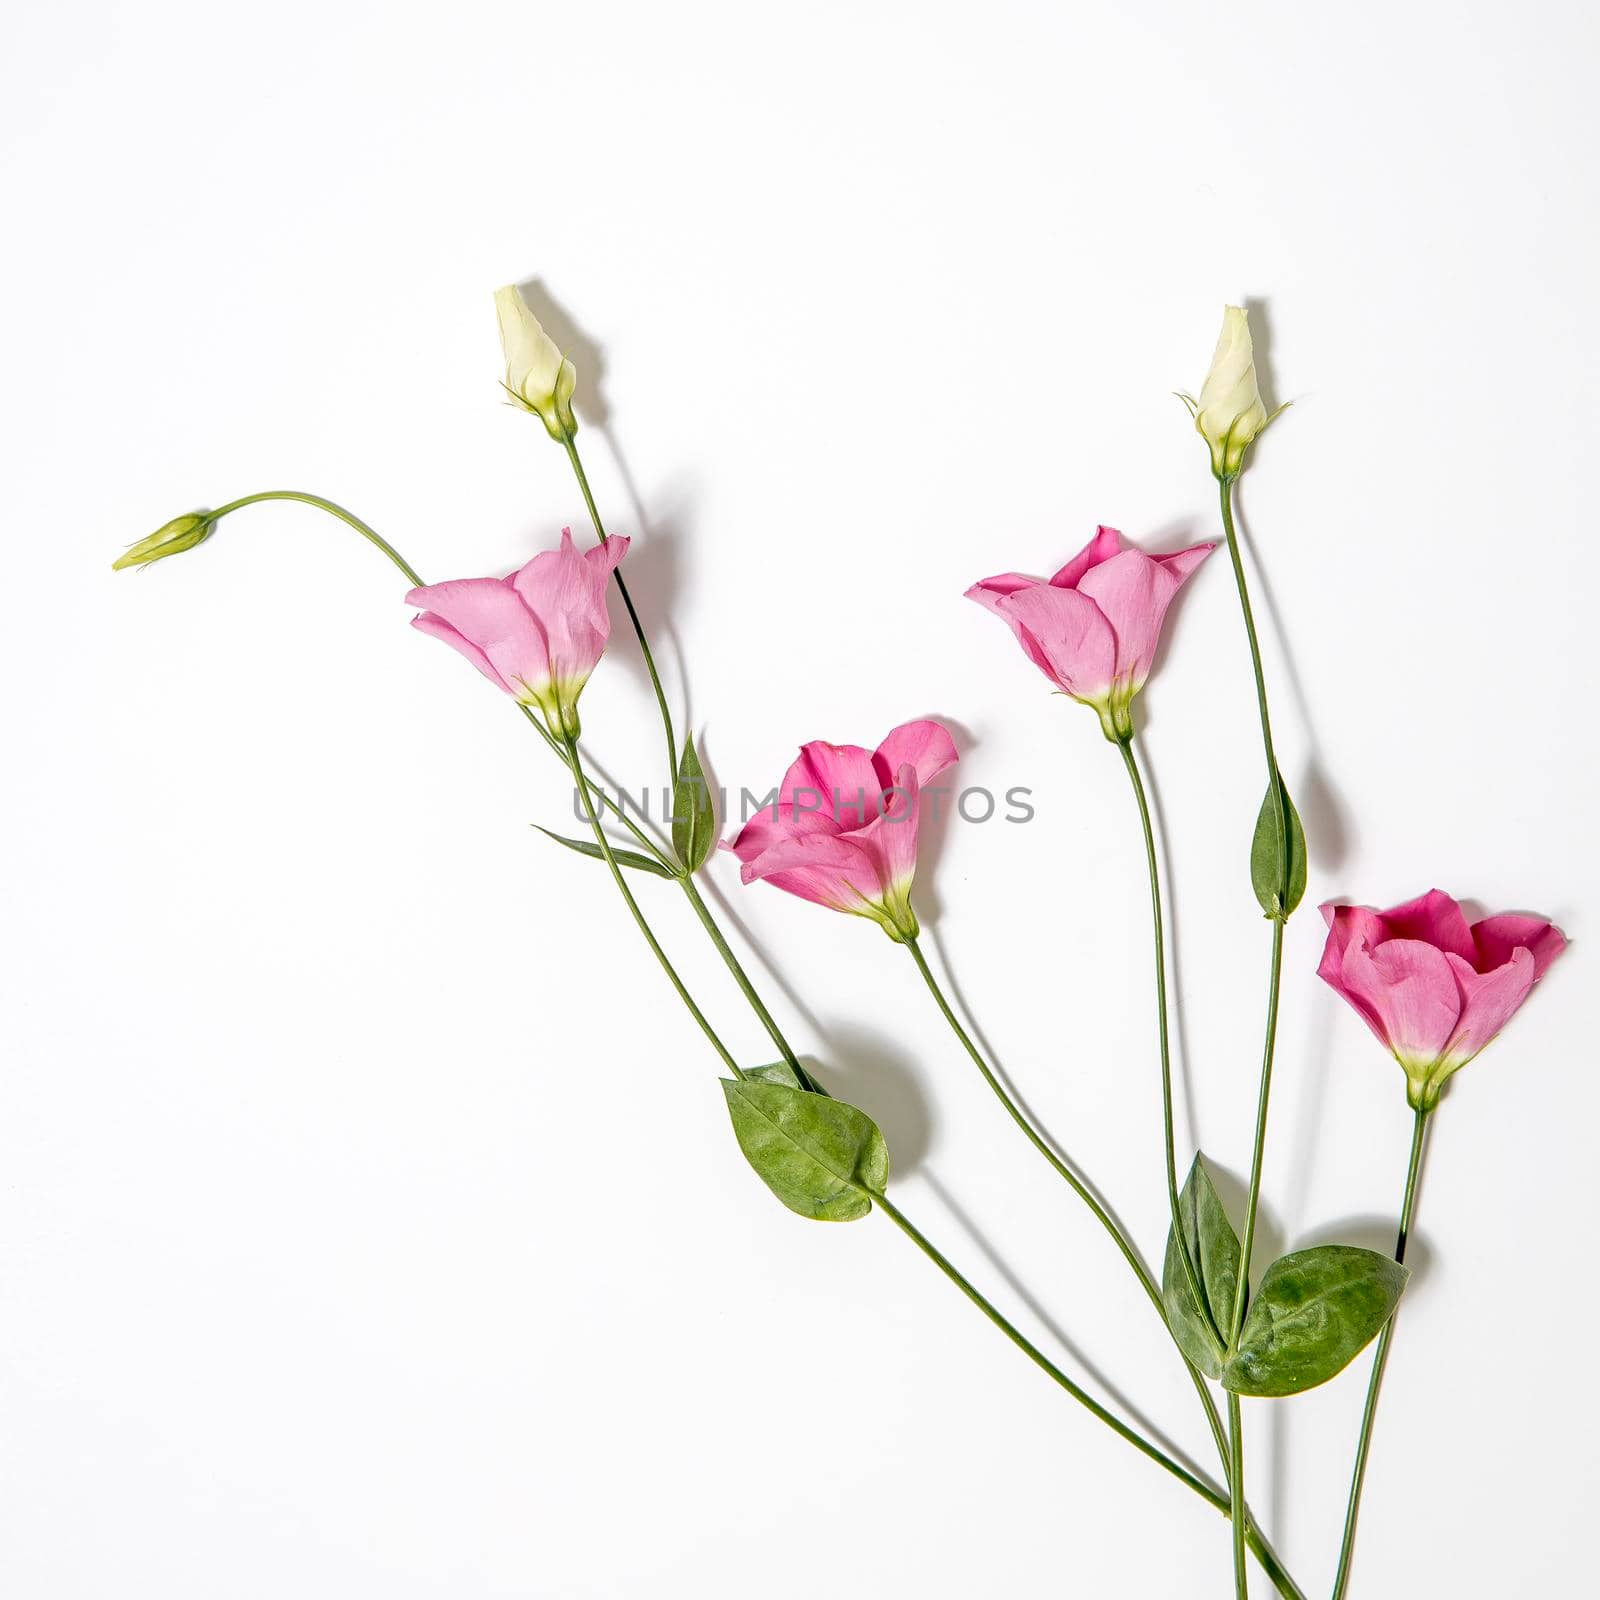 Pink eustoma flowers on white. Empty space for text. Empty space.